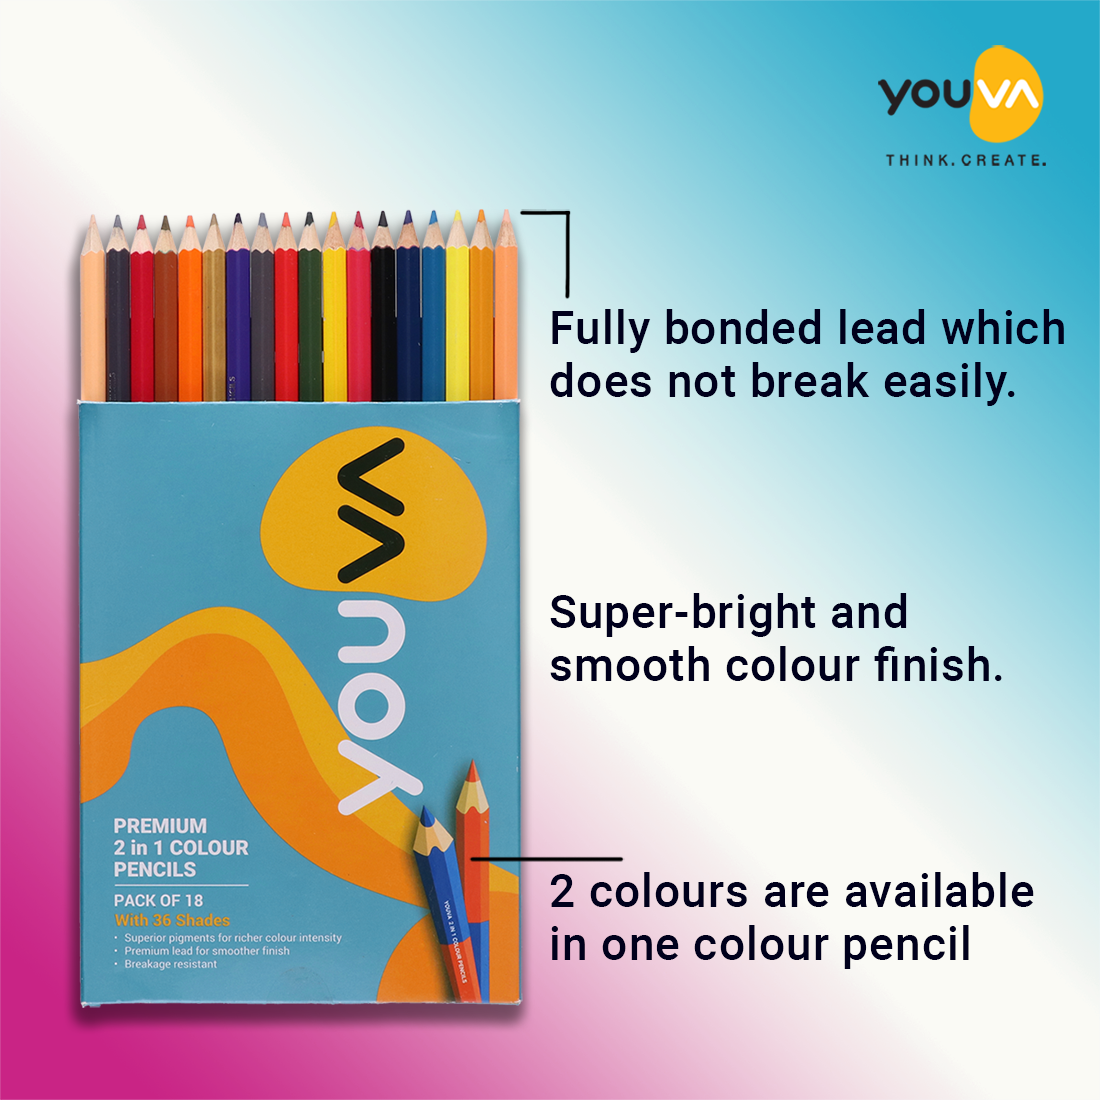 Navneet Youva | Premium 2 in 1 Colour Pencils for Students and Hobby artists | Pack of 18/36